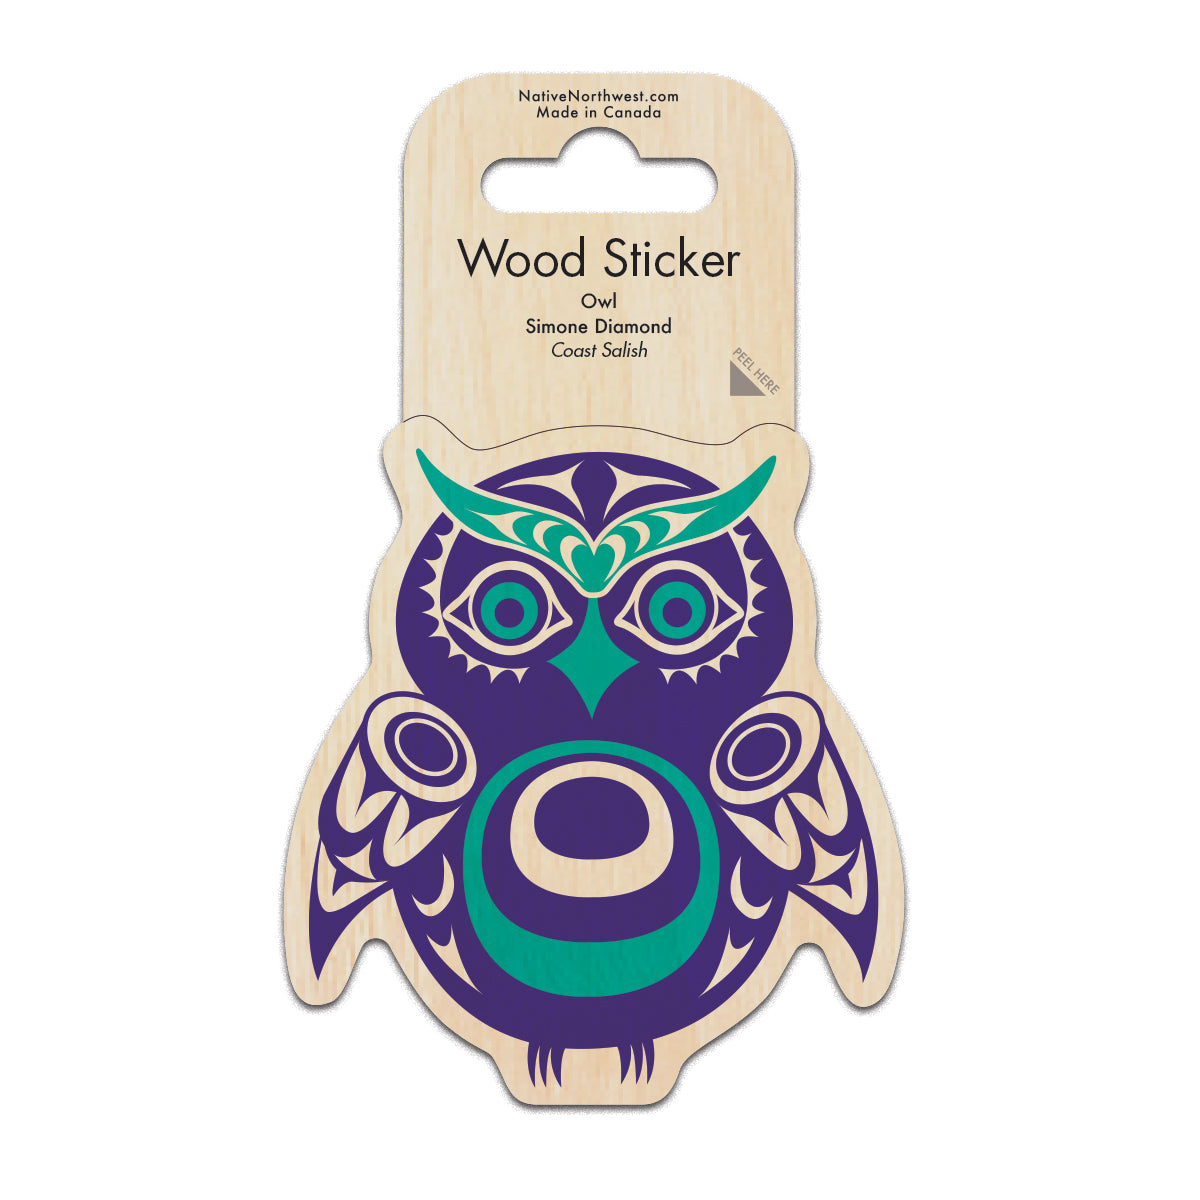 Wood Sticker Owl - Wood Sticker Owl -  - House of Himwitsa Native Art Gallery and Gifts